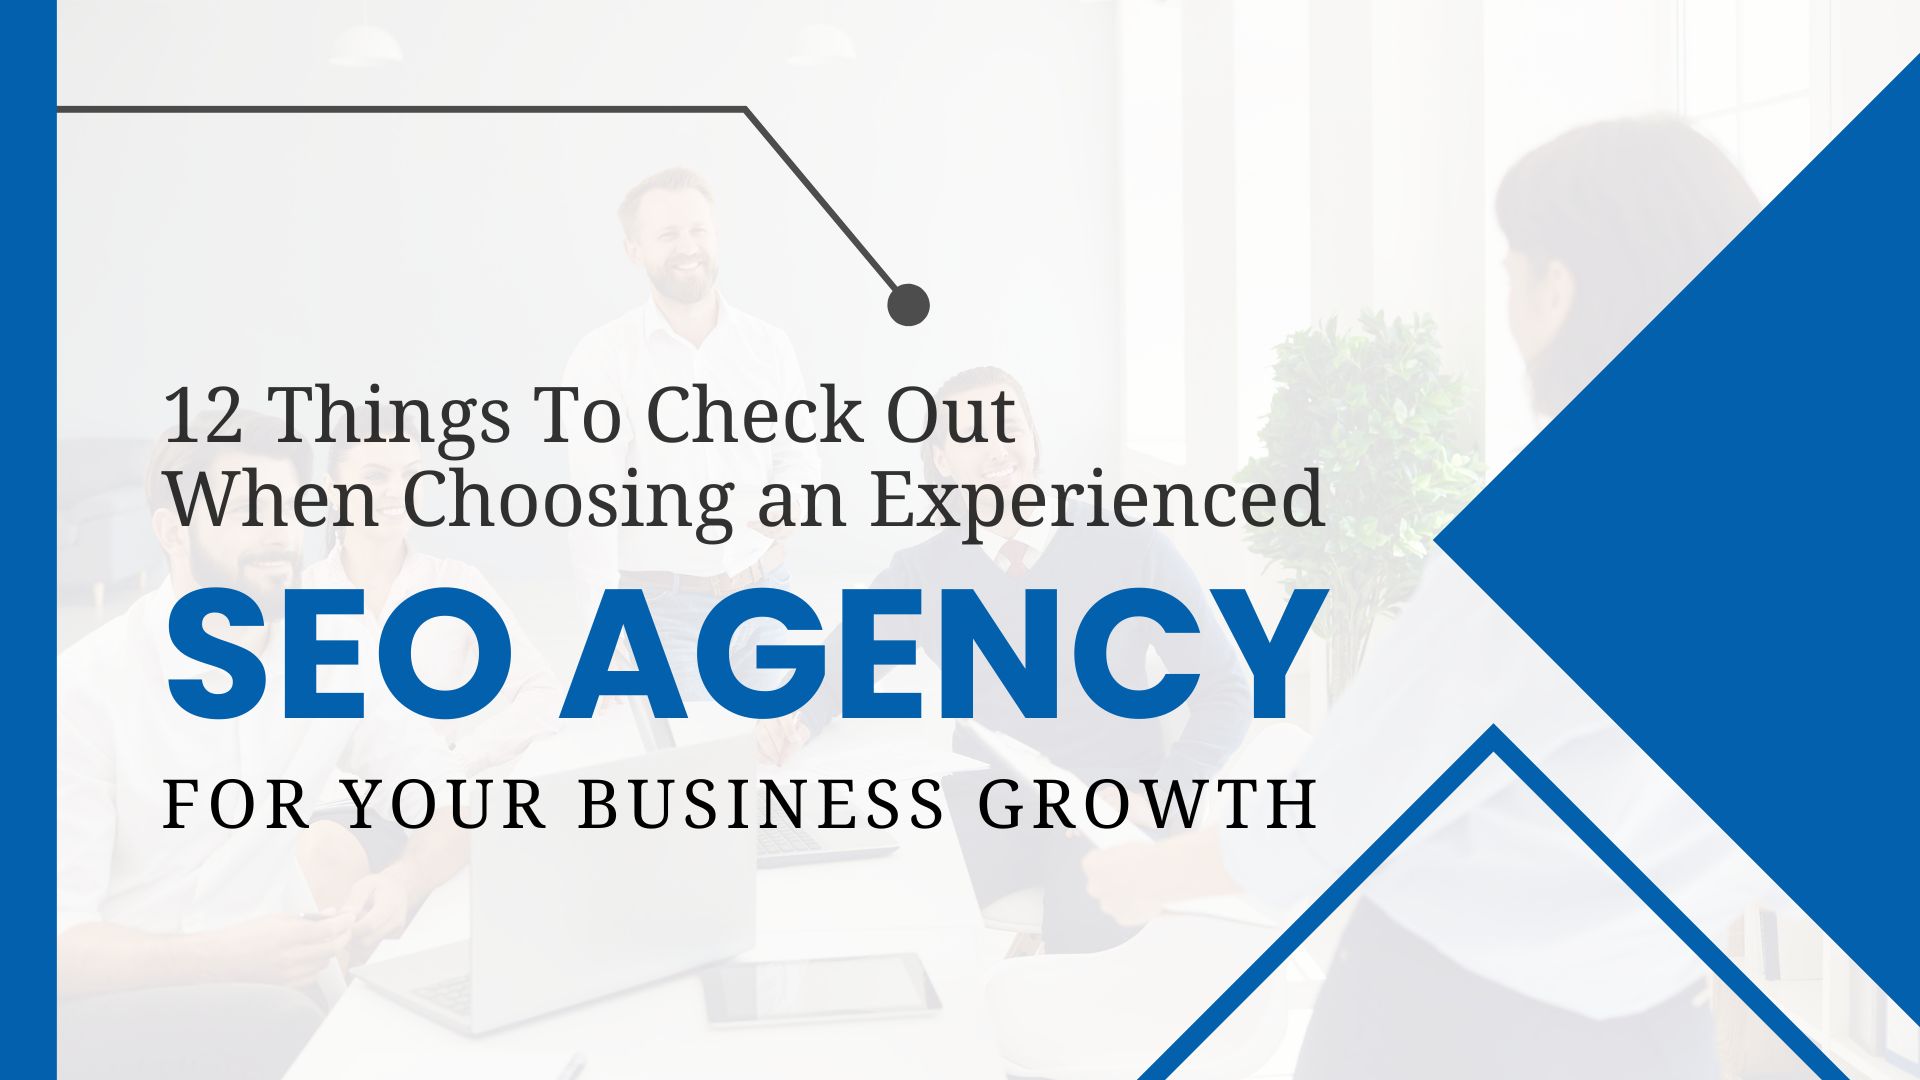 12 Things to Check Out When Choosing an Experienced SEO Agency for your business growth